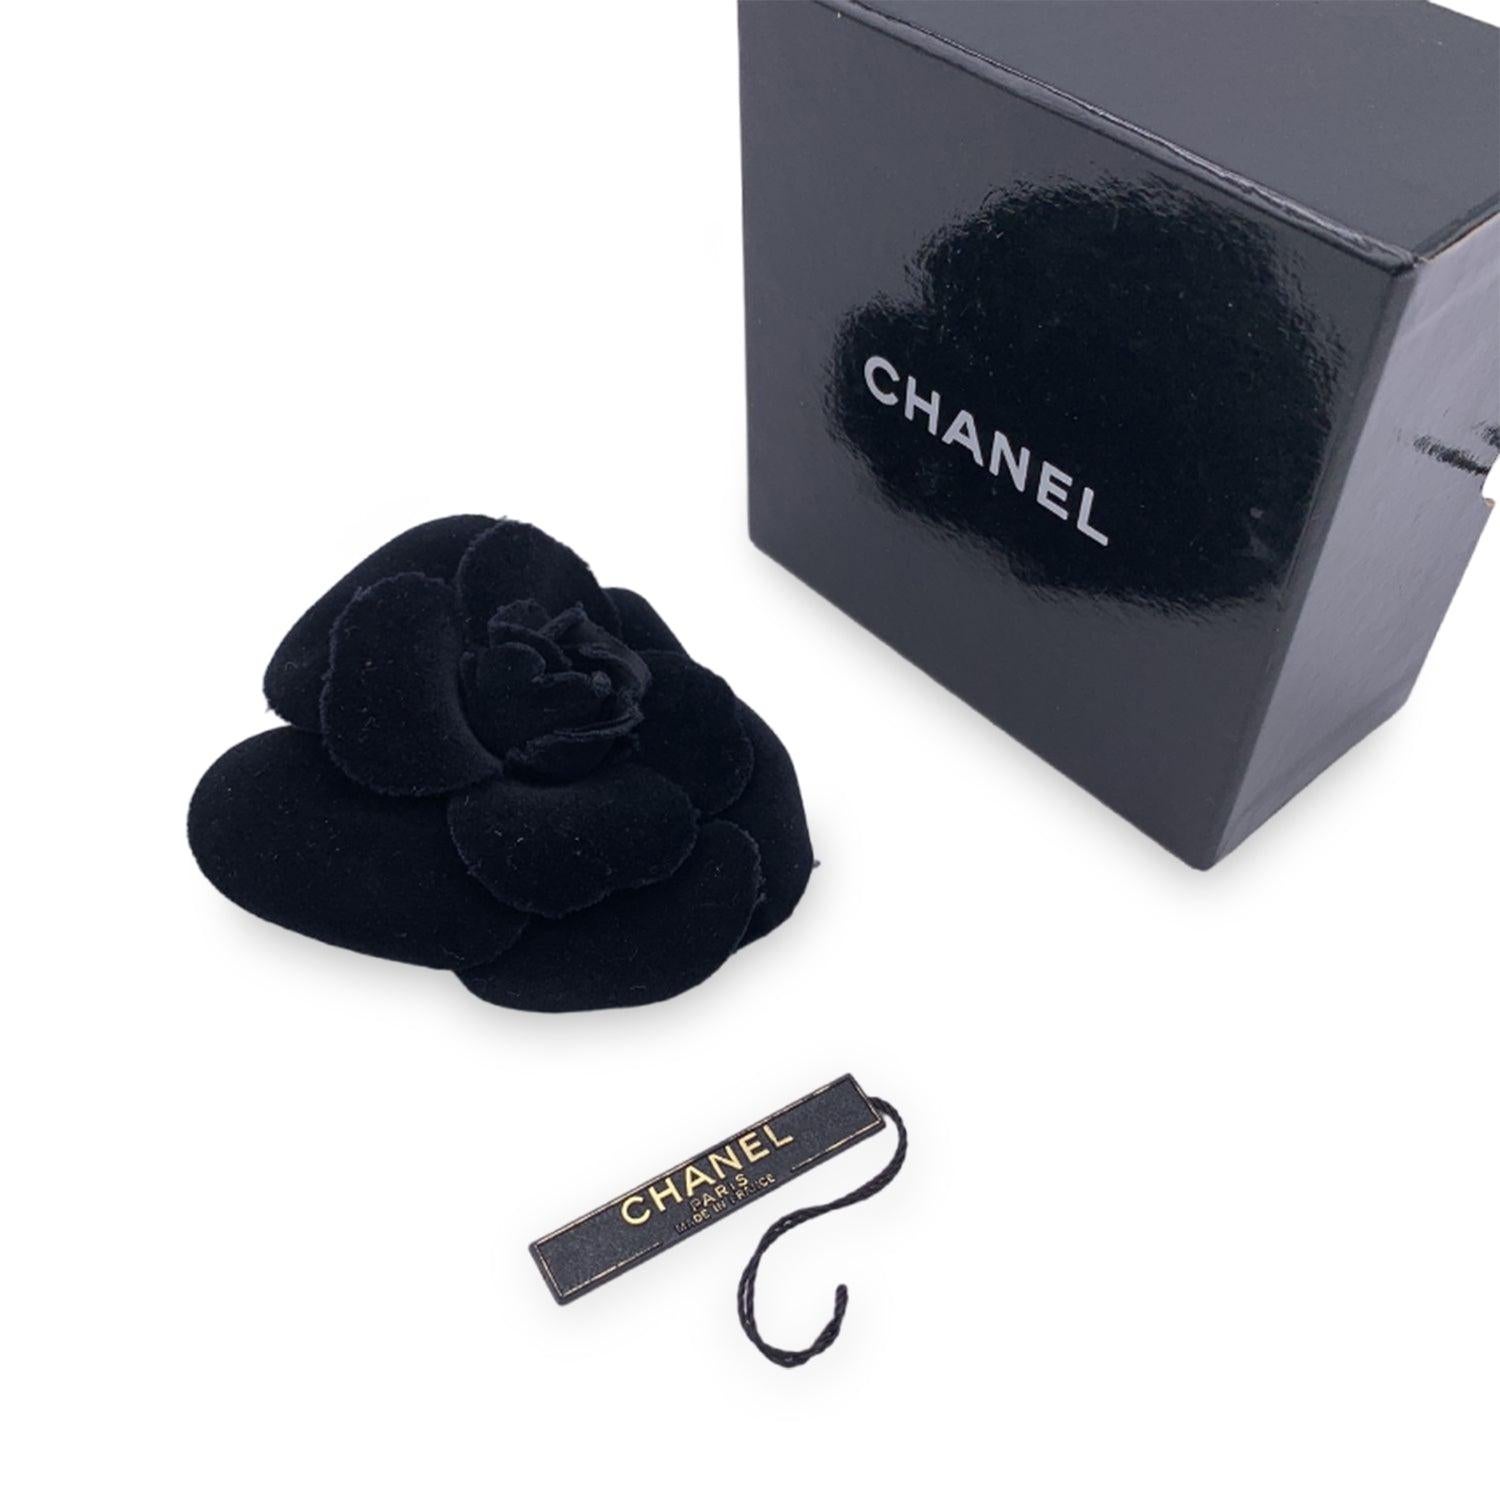 Chanel Vintage Camelia Camellia Flower Pin Brooch. Black velvet petals. Safety pin closure. Max width: 4 inches - 10.2 cm. 'CHANEL - CC - Made in France' oval tab on the back Condition A - EXCELLENT Gently used. Please check the photos carefully and